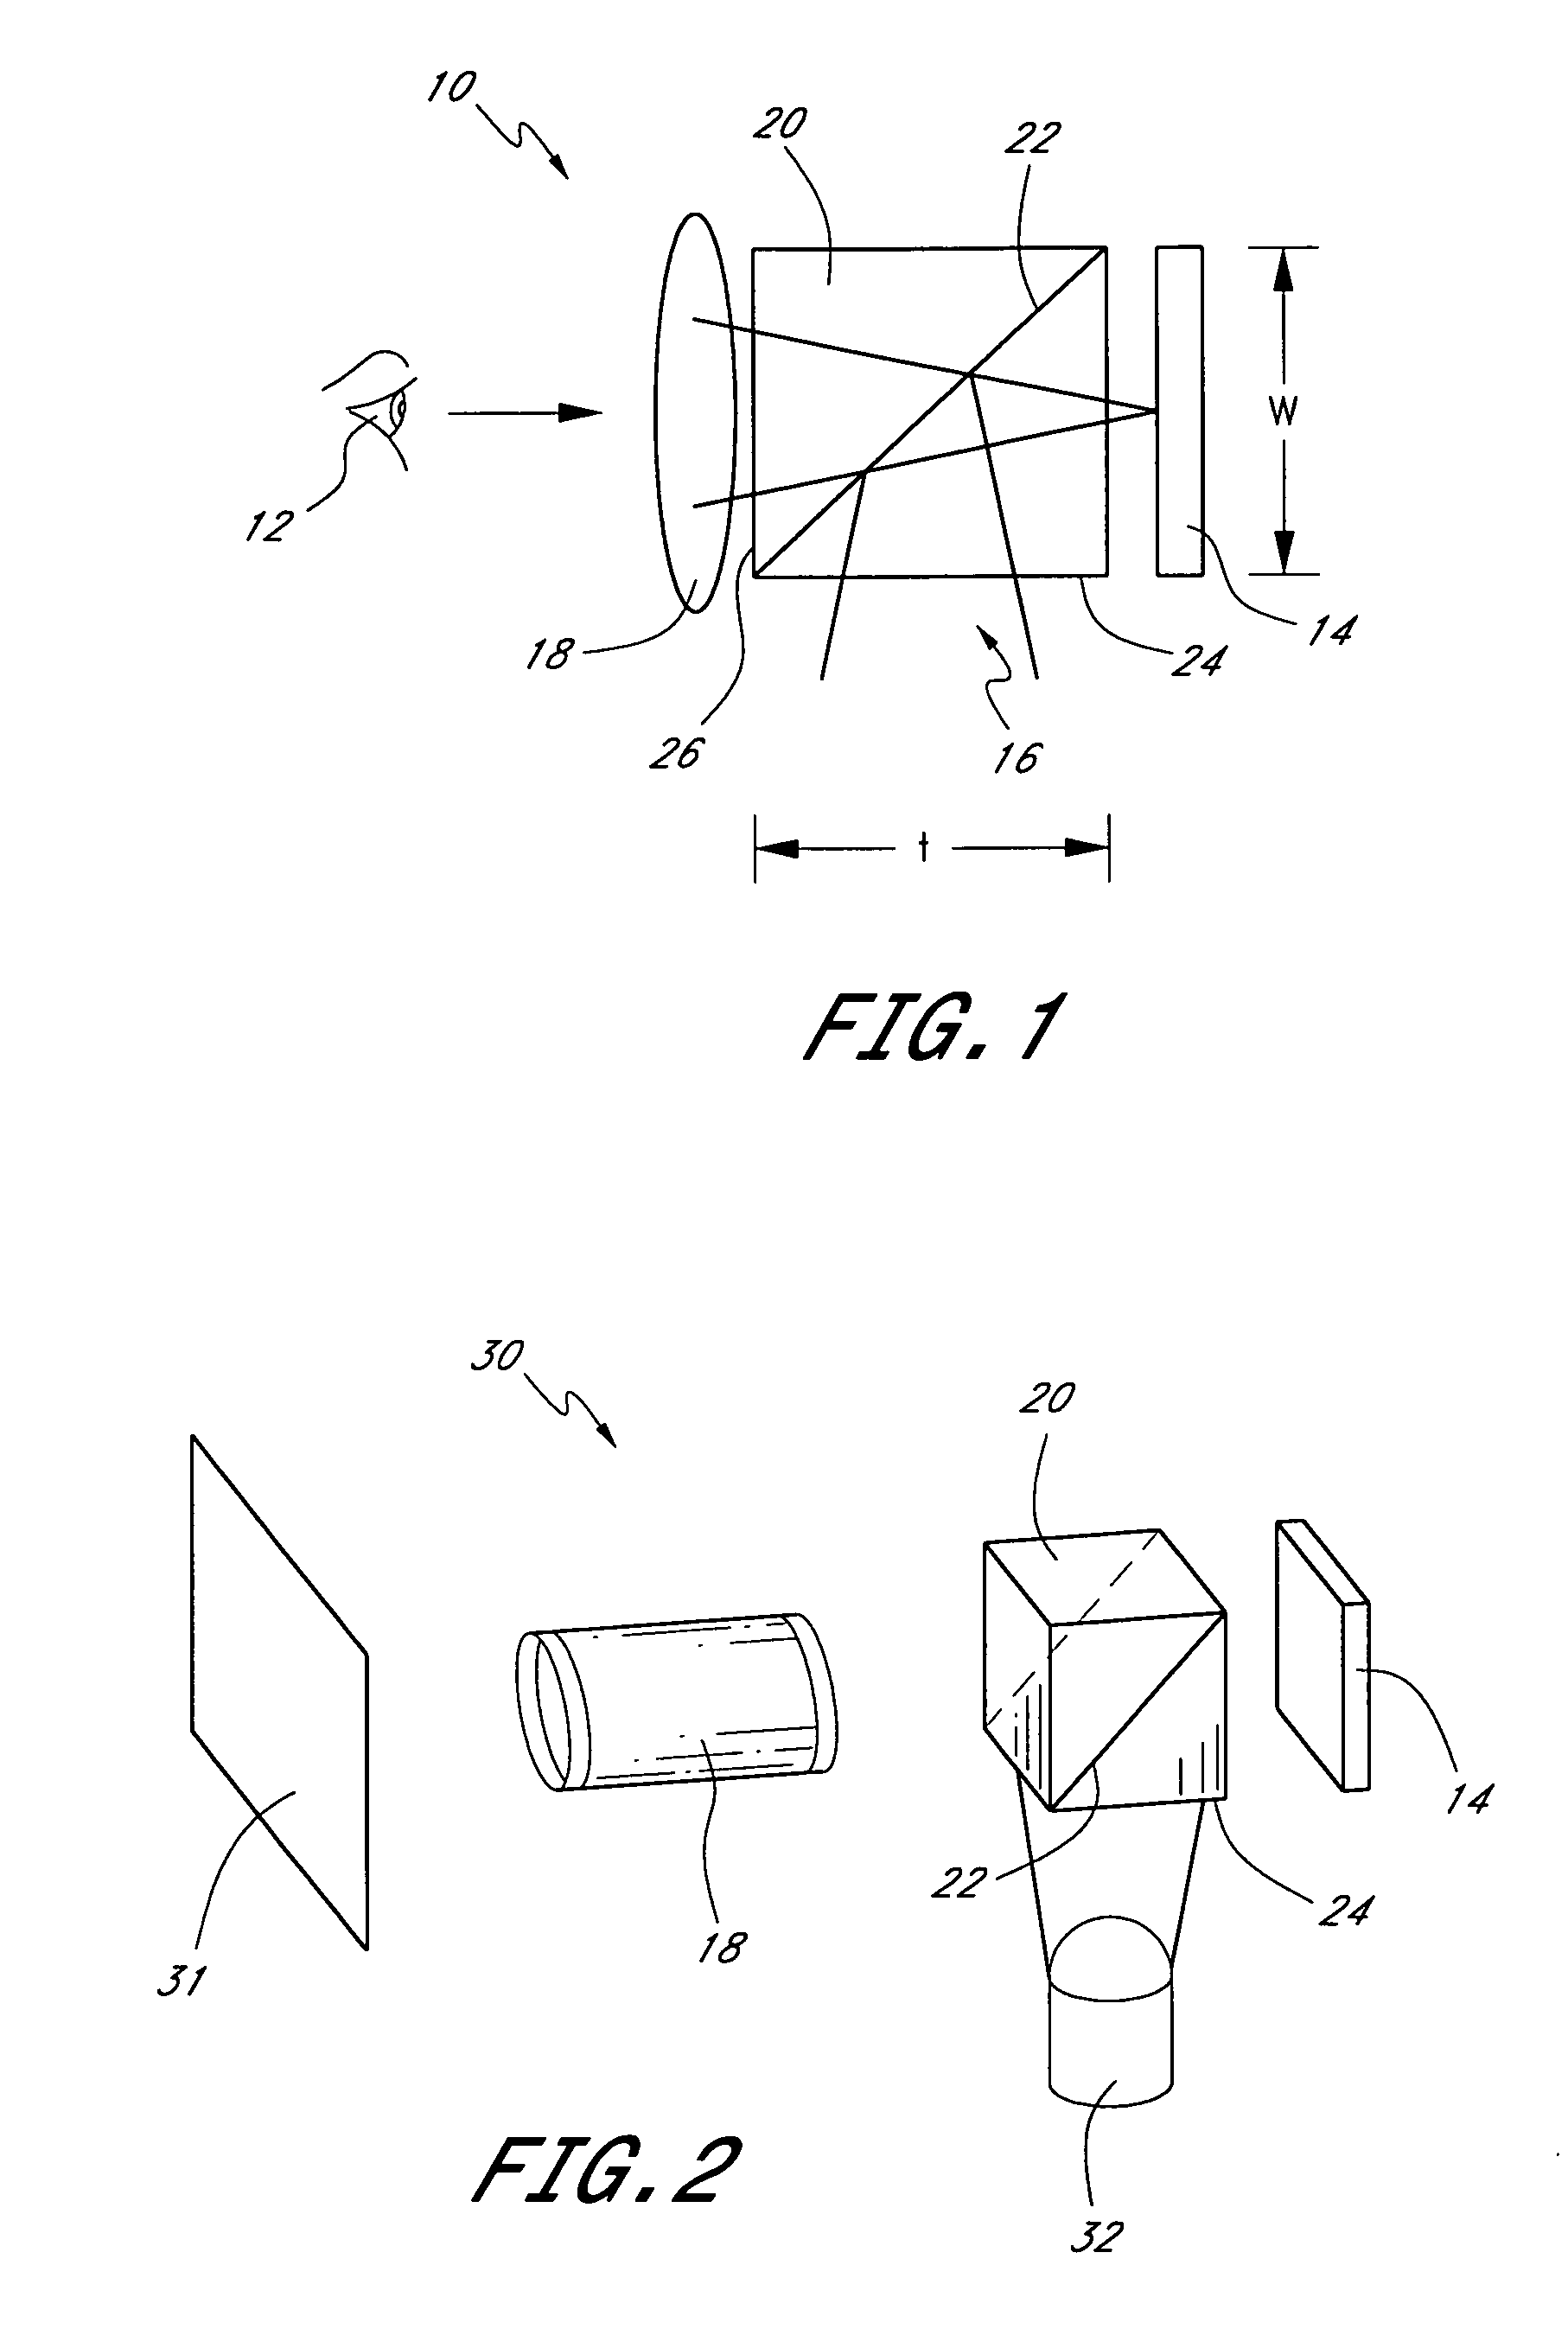 Light distribution apparatus and methods for illuminating optical systems